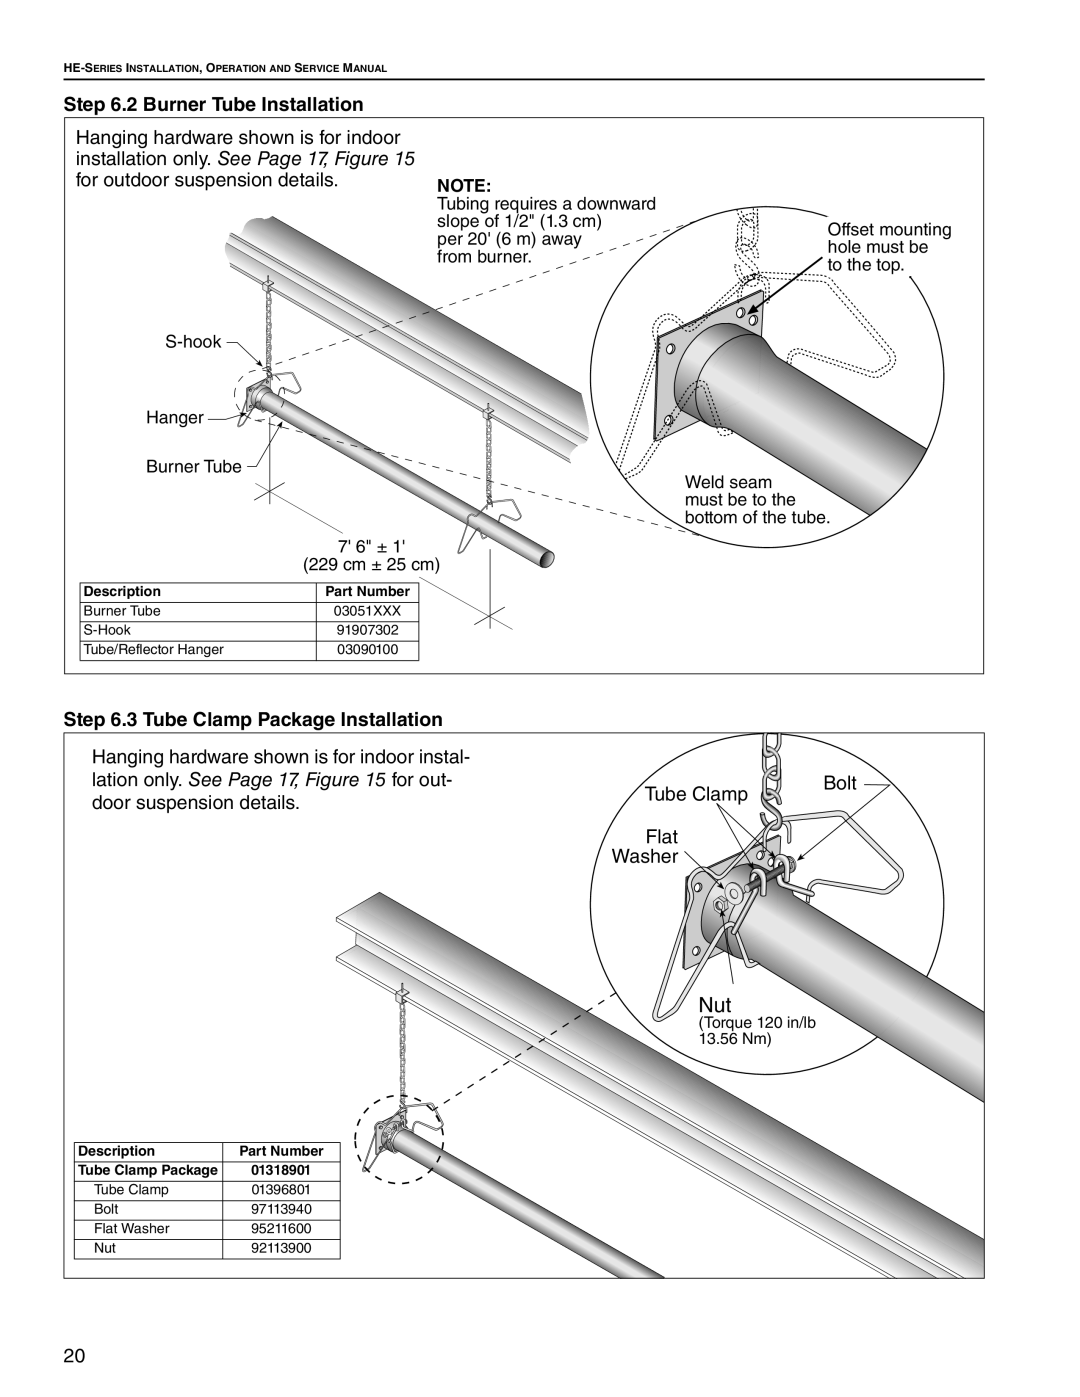 Roberts Gorden HE-150, HE-60, HE-80, HE-175, HE-40, HE-100 2 Burner Tube Installation, installation only. See Page 17, Figure 